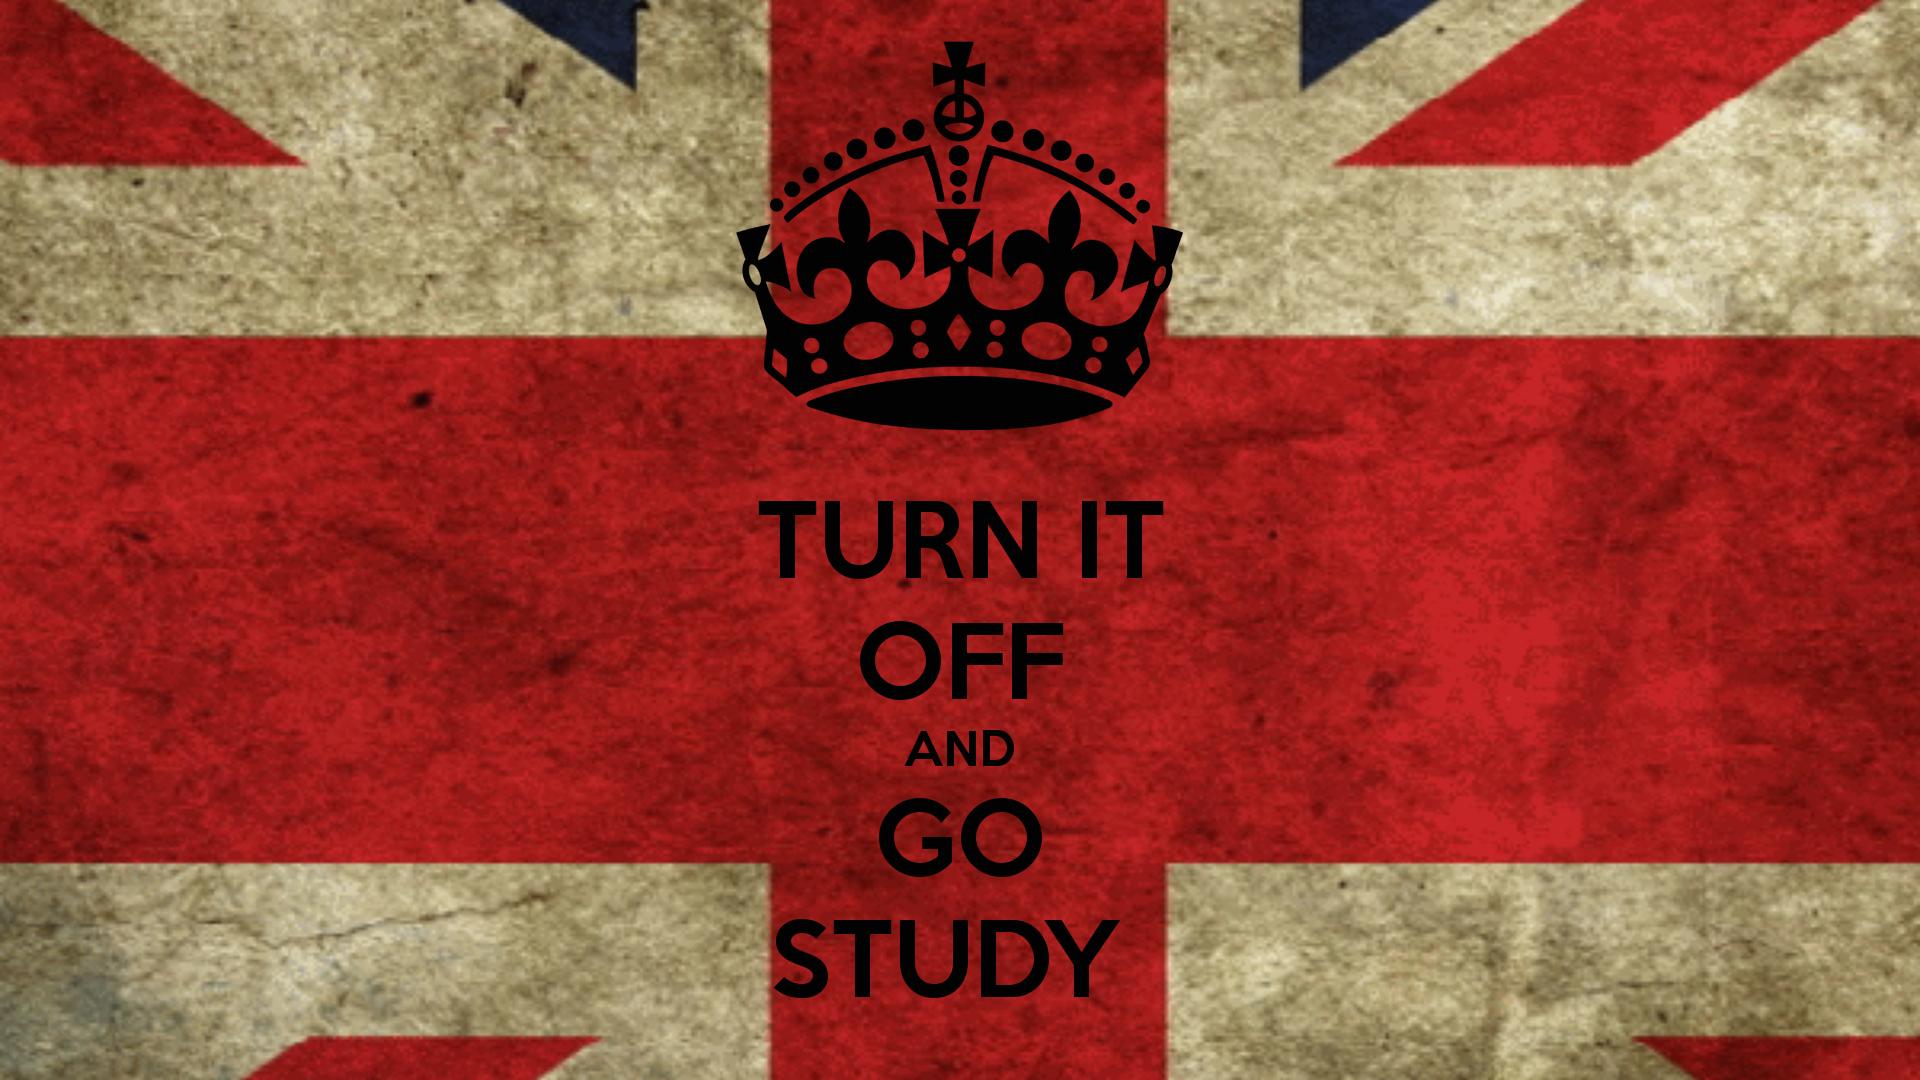 Wallpapers Of Study - Keep Calm And Study - HD Wallpaper 